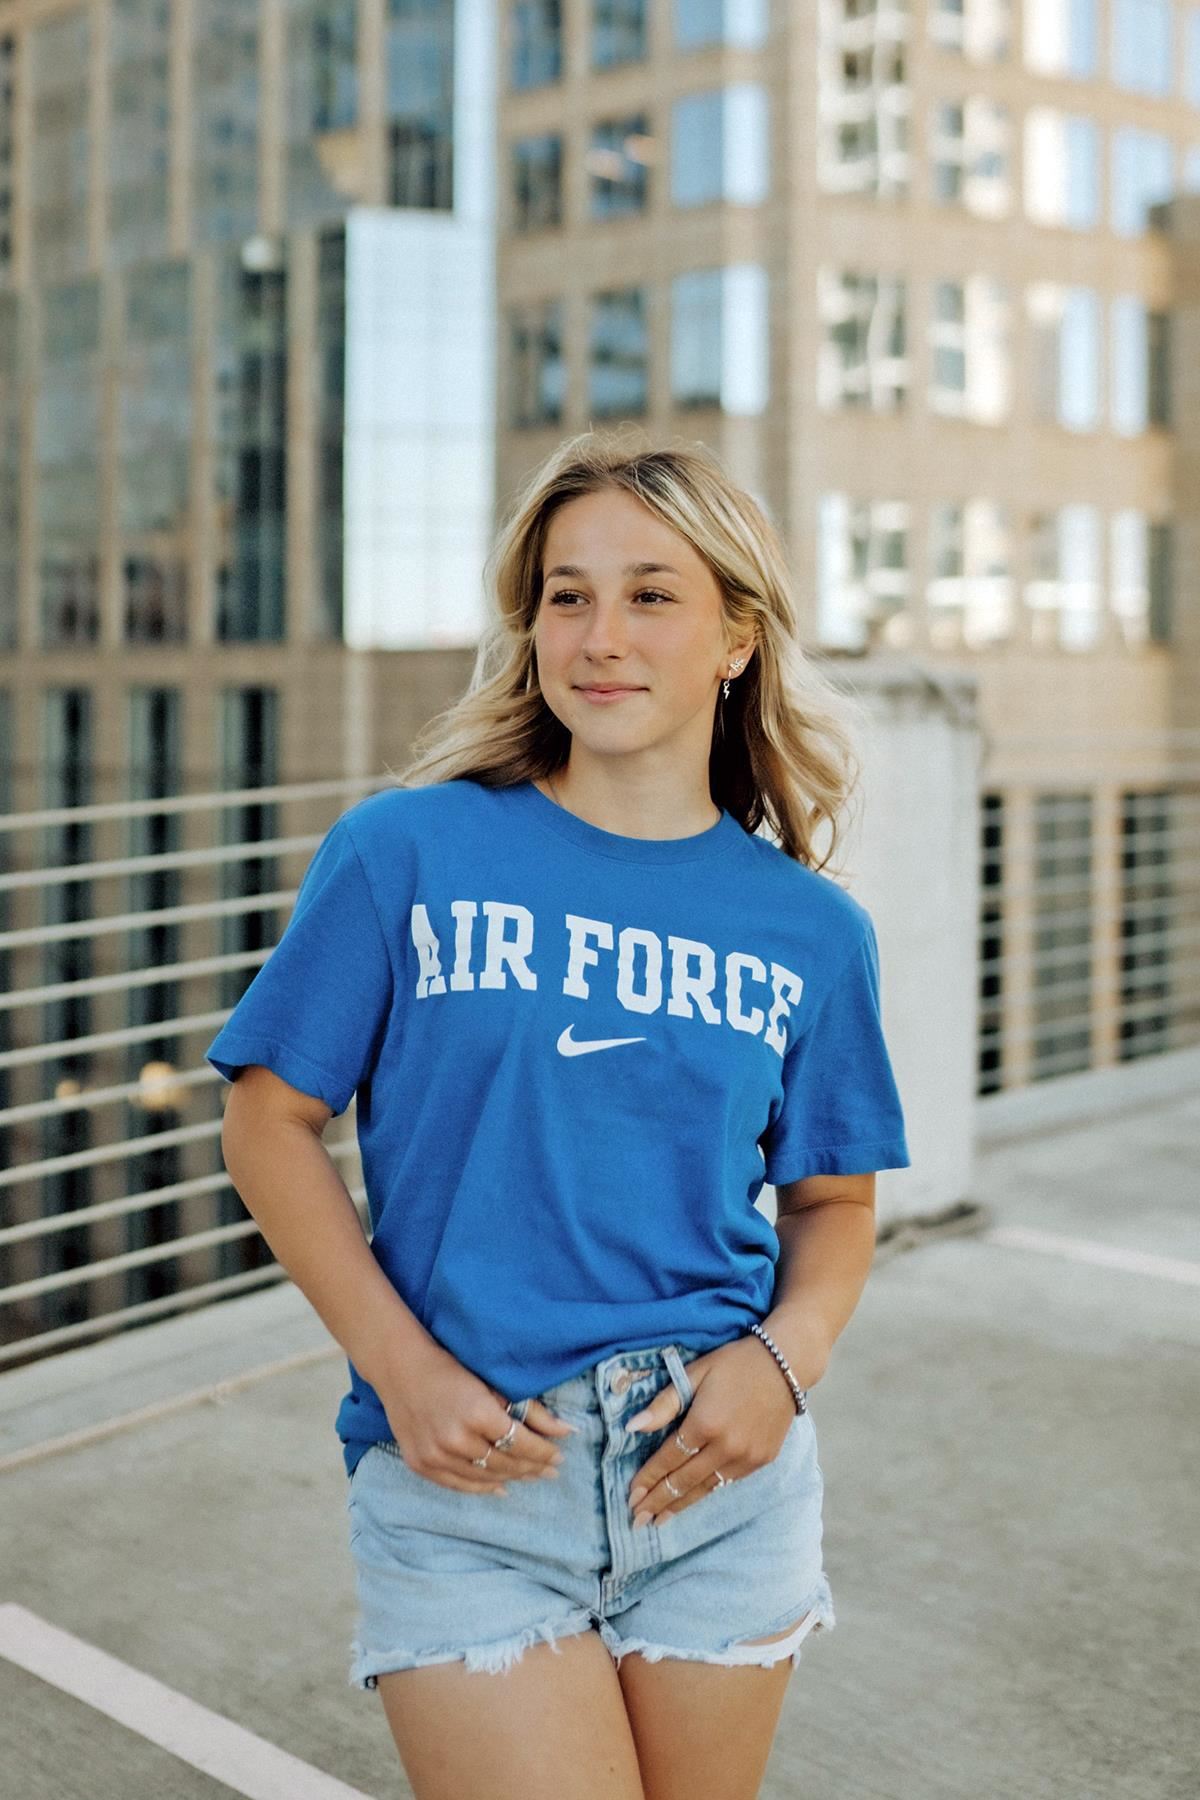 Cypress Woods High School graduate Emma Opalacz was appointed to the U.S. Air Force Academy in Colorado Springs, Colorado.